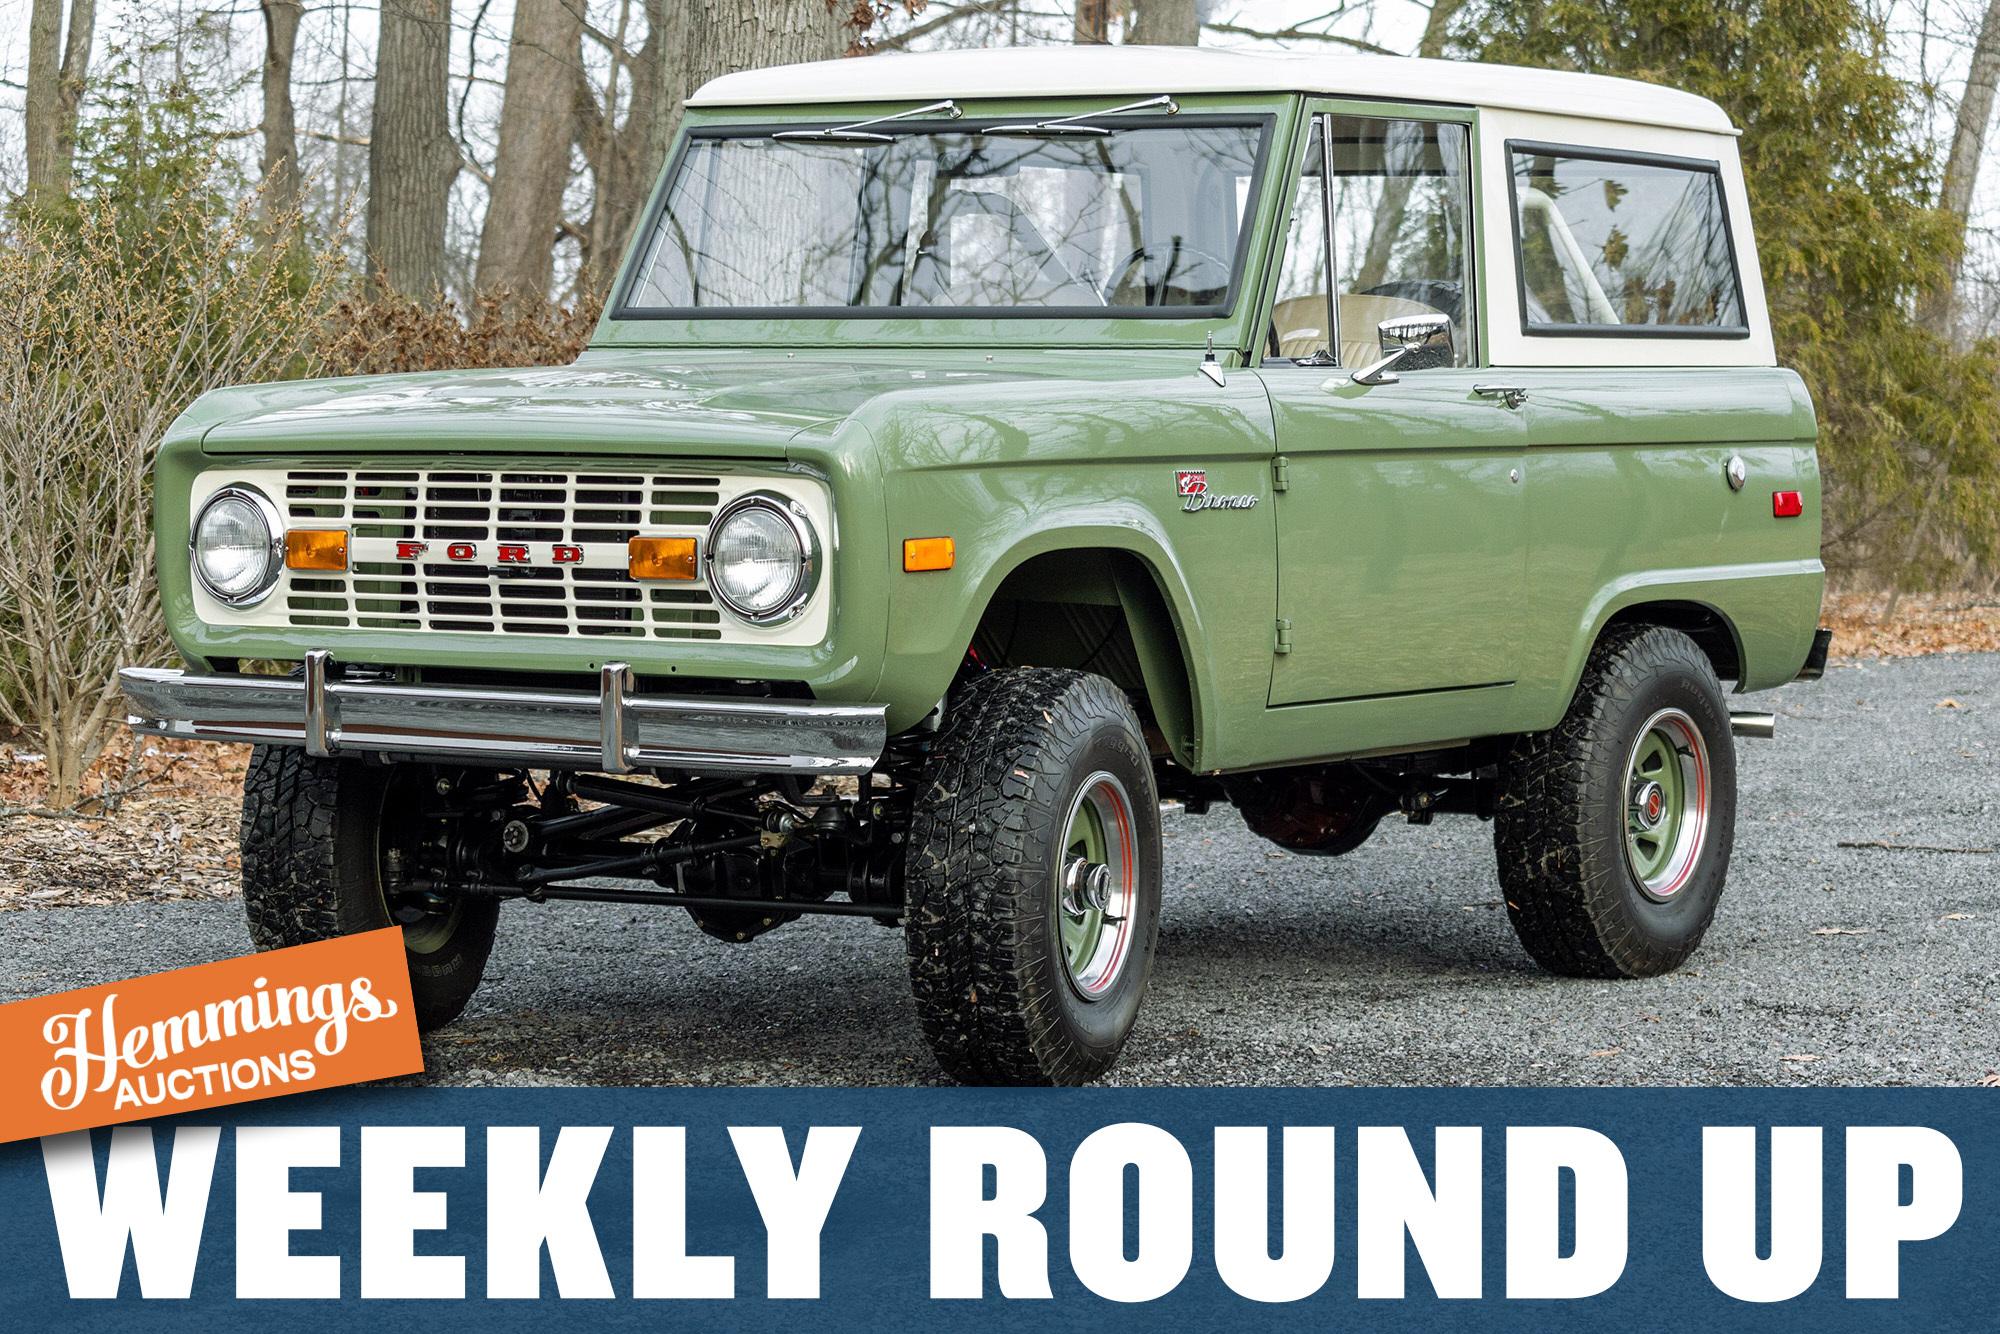 Hemmings Auctions Weekly Round Up: 1974 Ford Sport Bronco, 2006 Dodge Magnum SRT8, 1965 Pontiac GTO